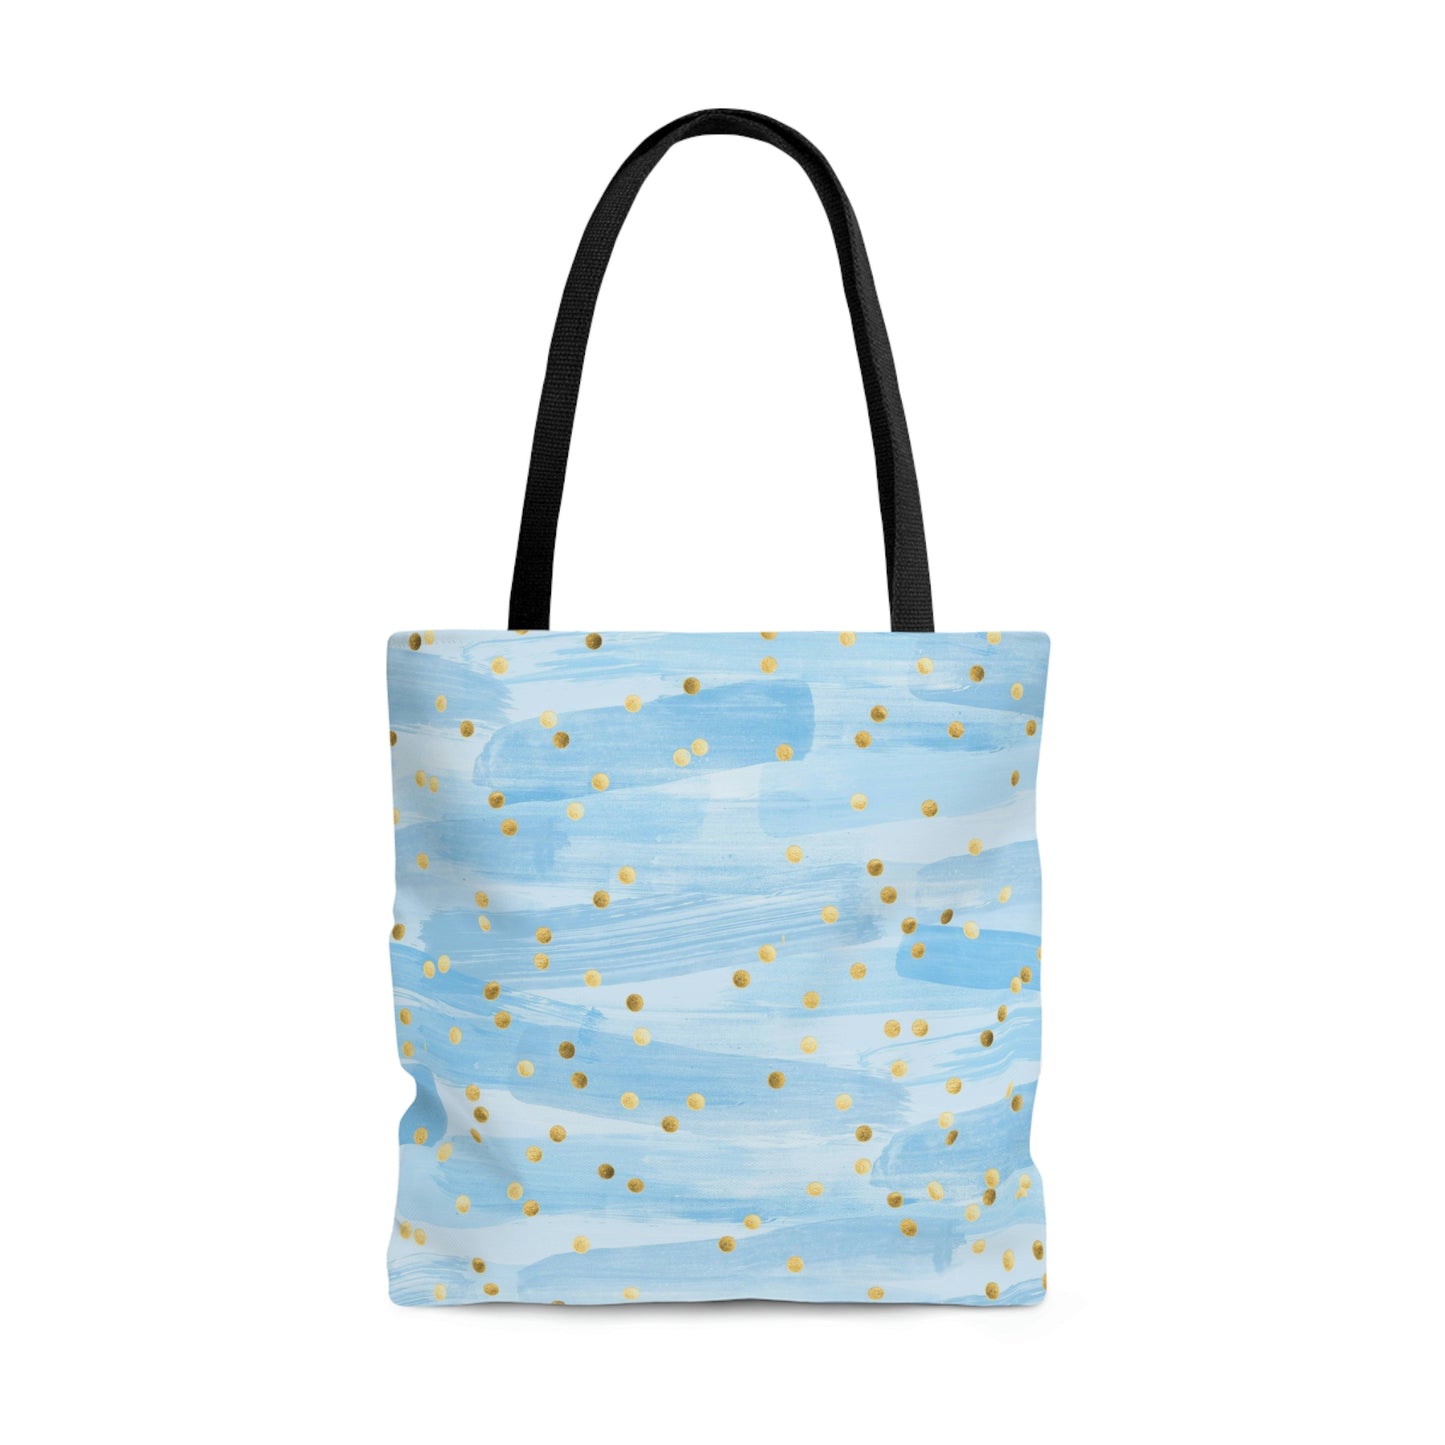 Blue Gold Speck Weekender Bag for Women, Glitter Tote Bag, Tote Bag With Pockets, Cute Tote Bag Canvas